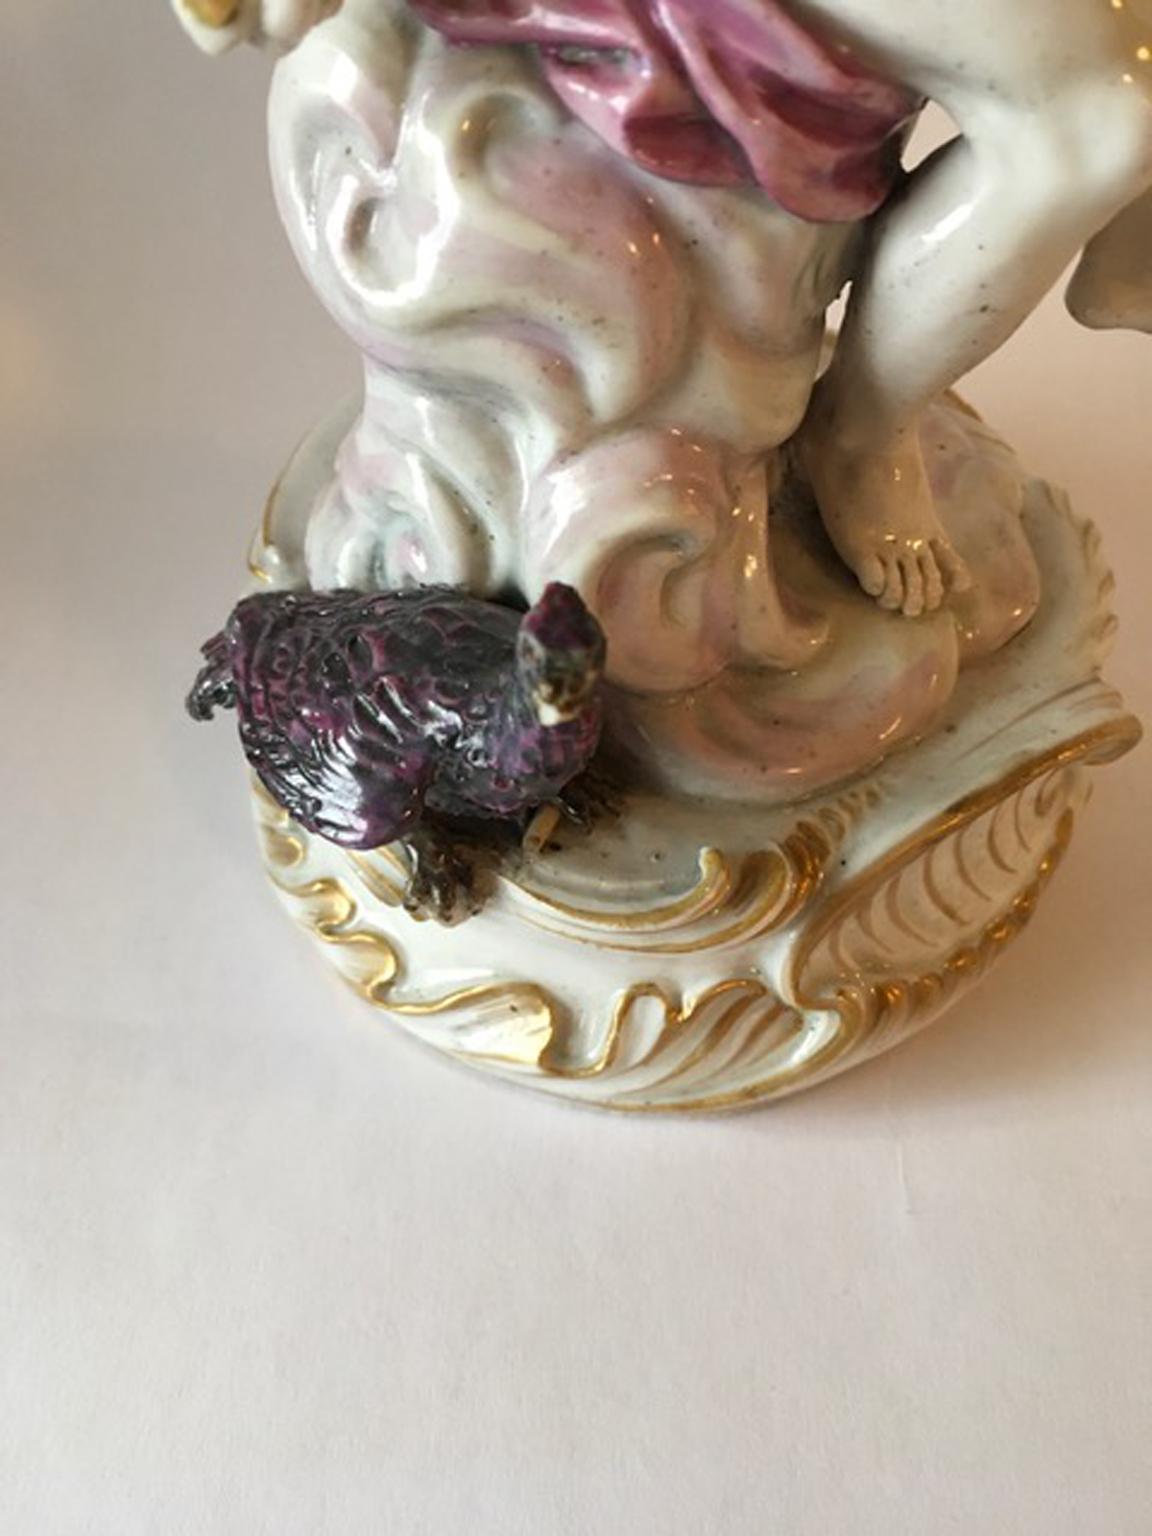 Europe 18th Century Attribuited to Meissen Porcelain Giove Figurine For Sale 3